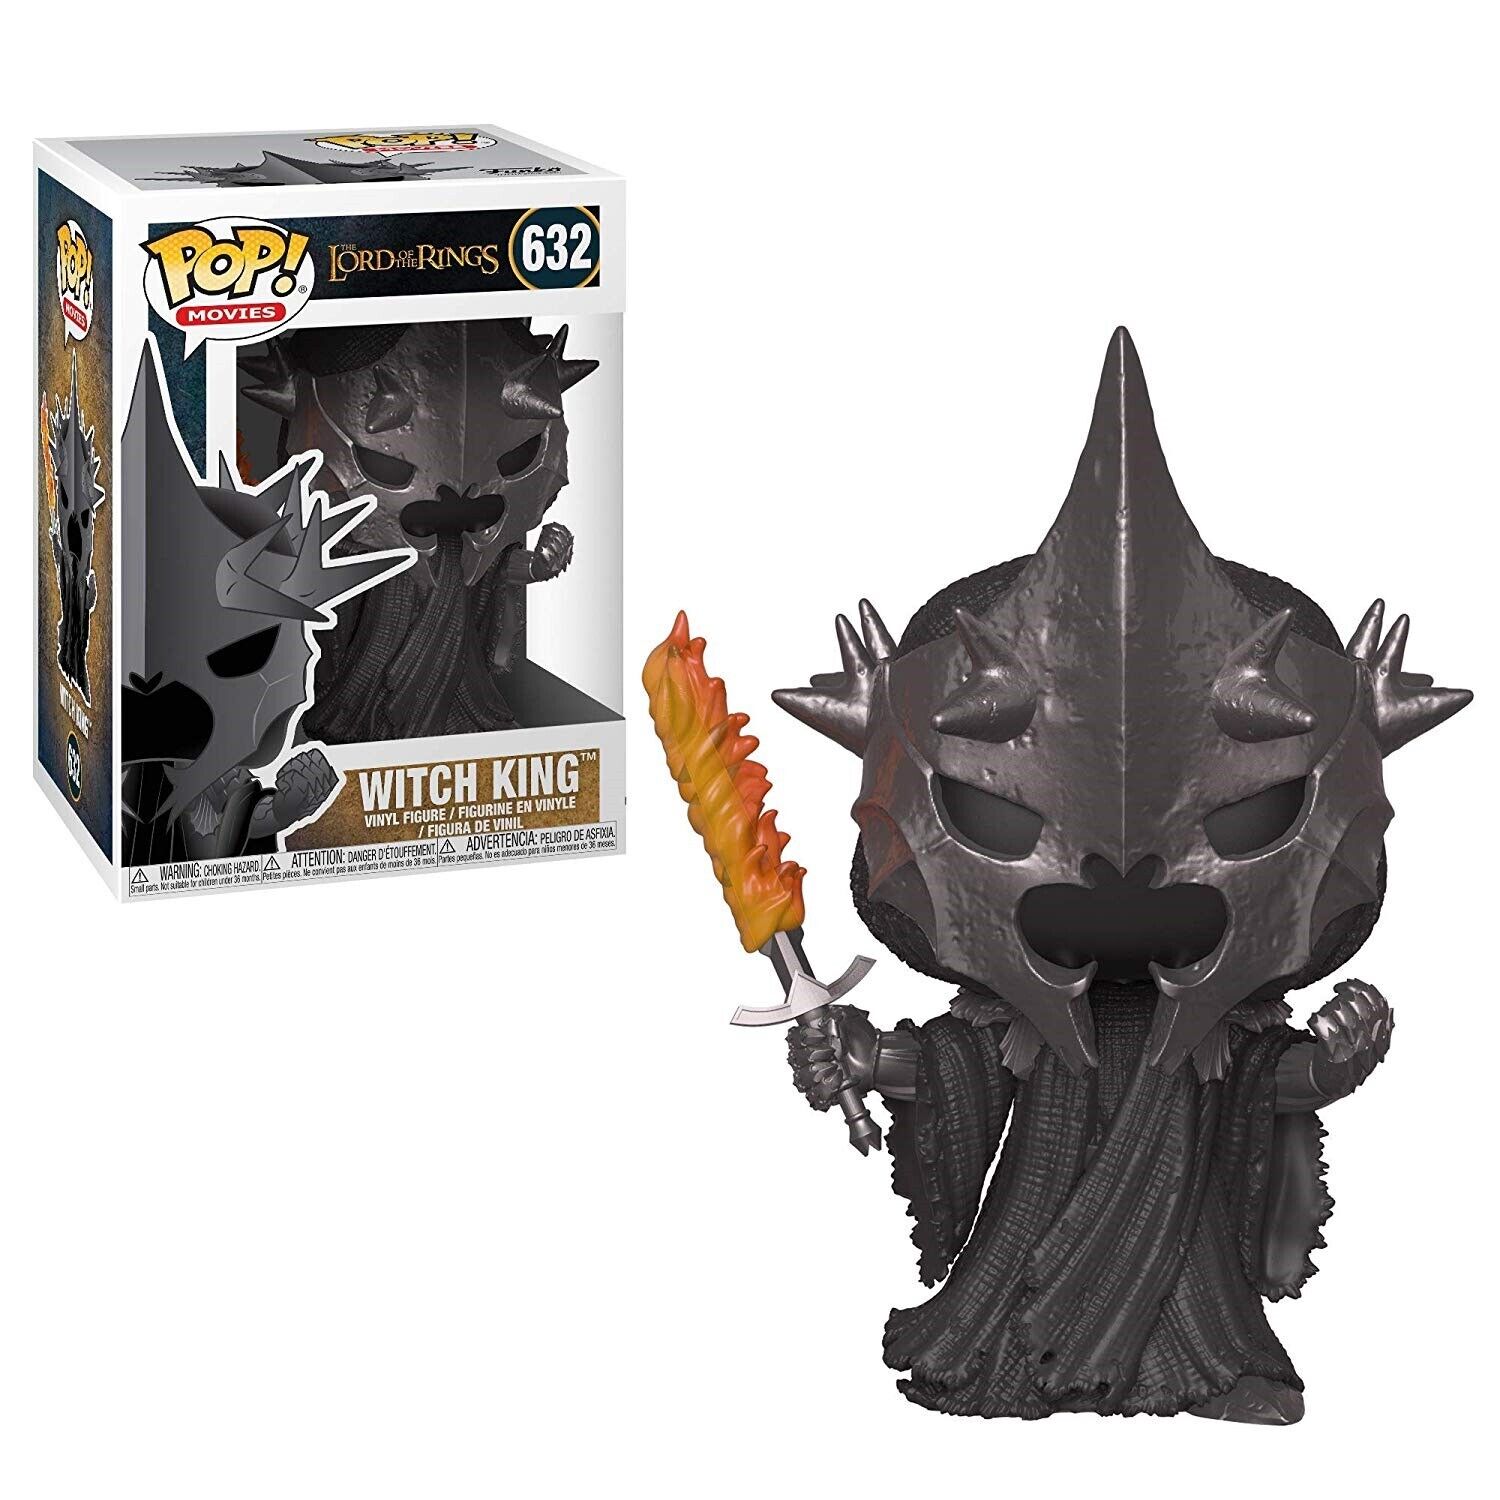 Funko Pop Movies Lord Of The Rings / Hobbit S4 Witch King